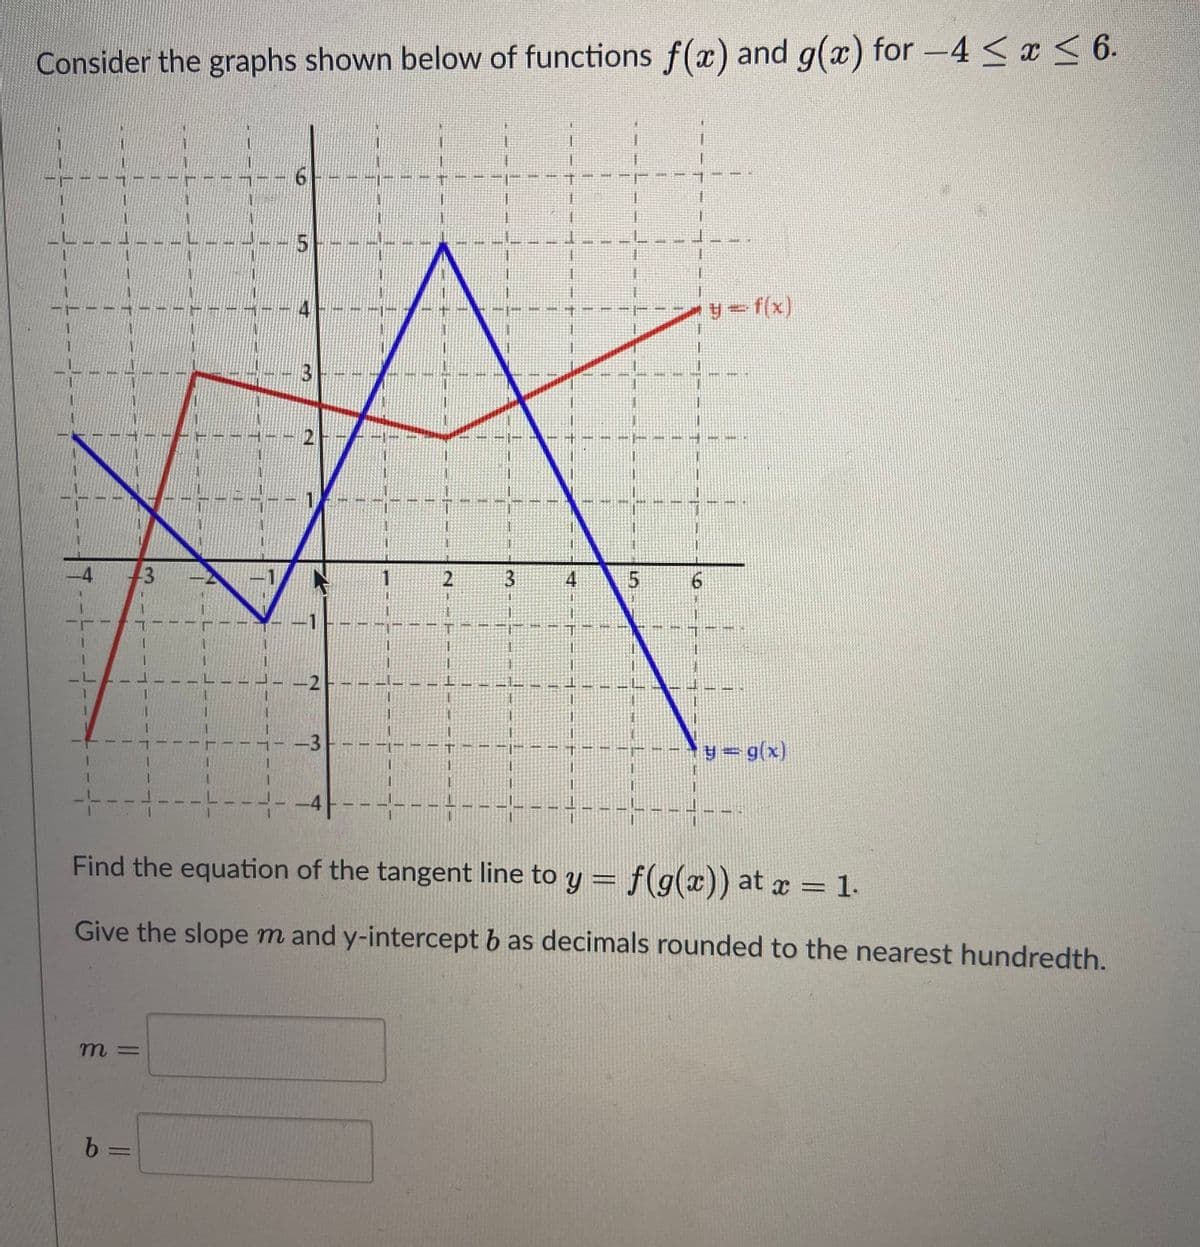 Consider the graphs shown below of functions f(x) and g(a) for -4 <x < 6.
1.
5--
4
1,
-4
3
1
4
6.
-2-
-3
y = g(x)
-4-
Find the equation of the tangent line to y = f(g(x)) at r = 1.
x =
Give the slope m and y-intercept b as decimals rounded to the nearest hundredth.
=
2.
-ト
